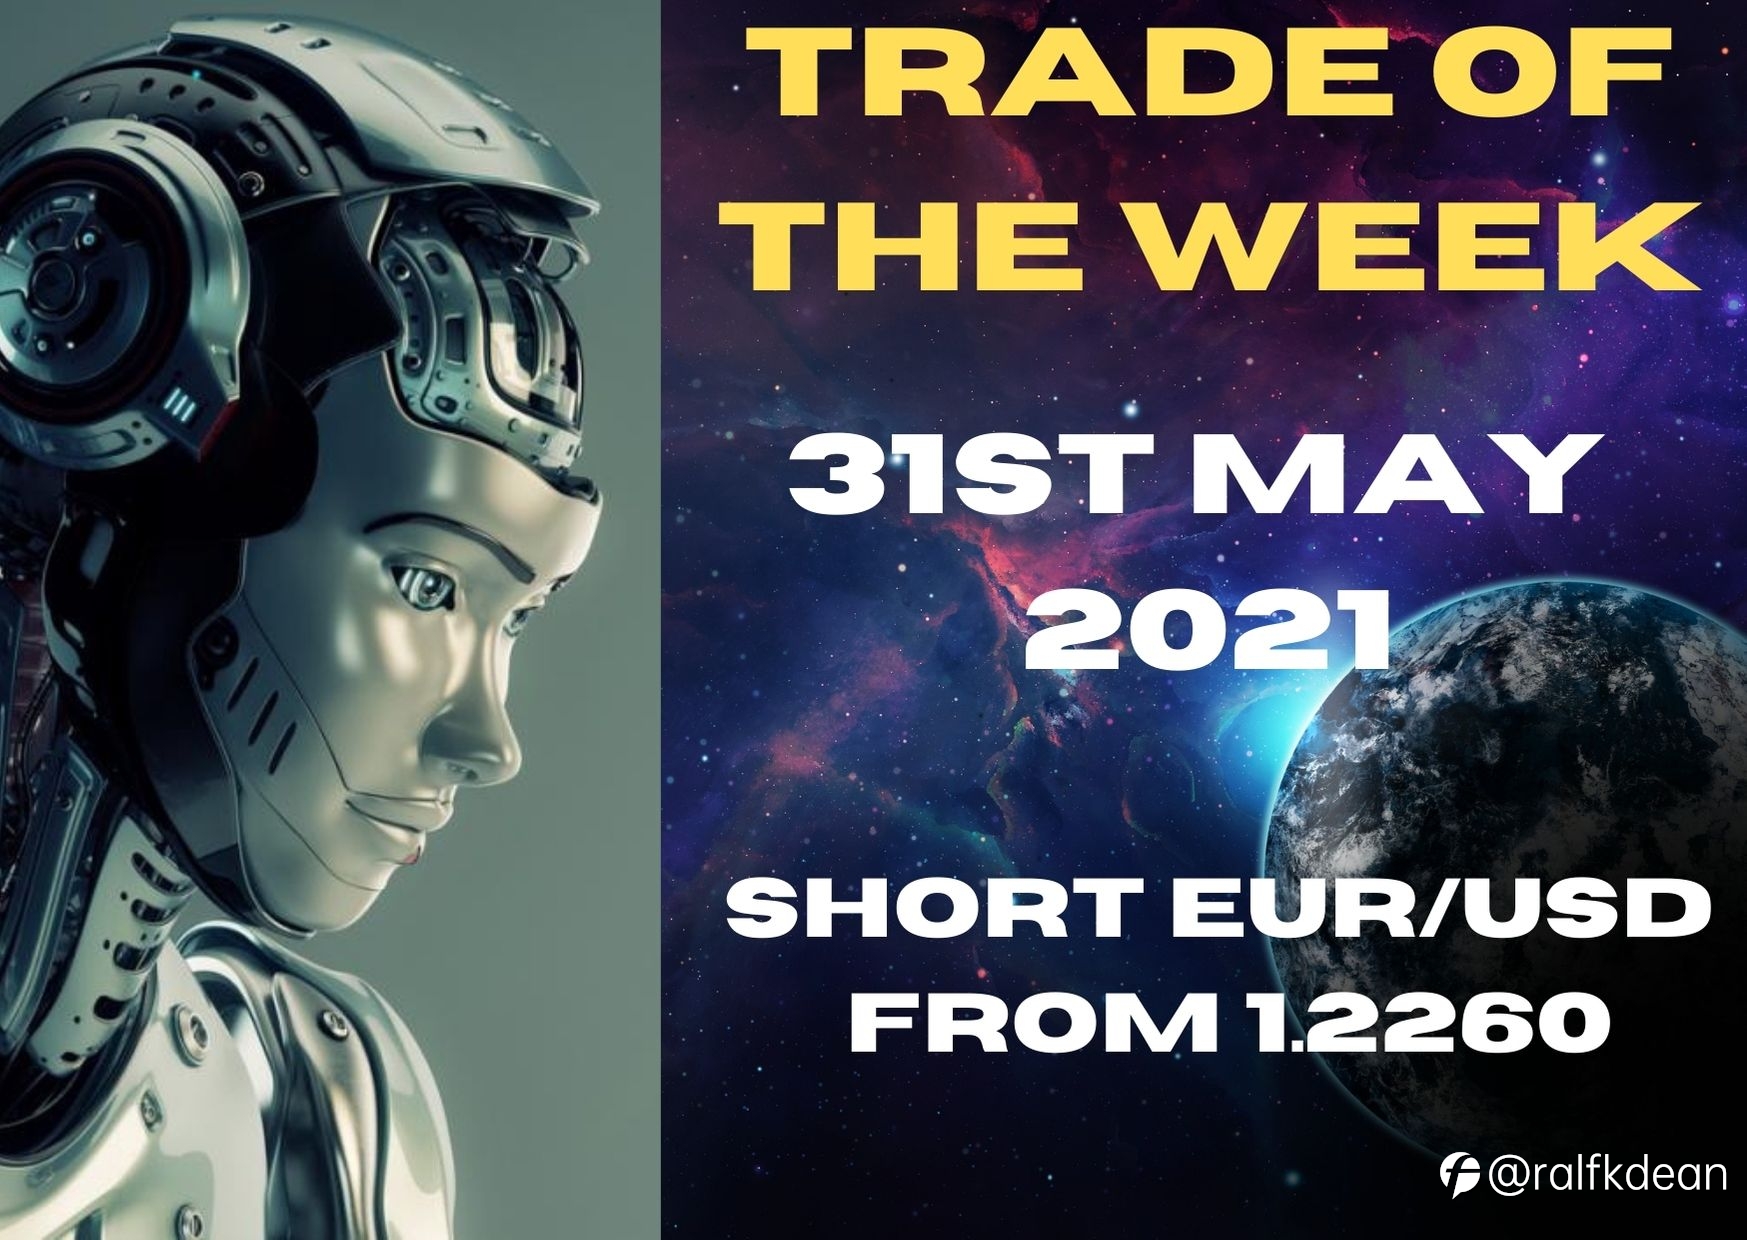 Trade of the Week 31st May 2021 - SHORT EUR/USD